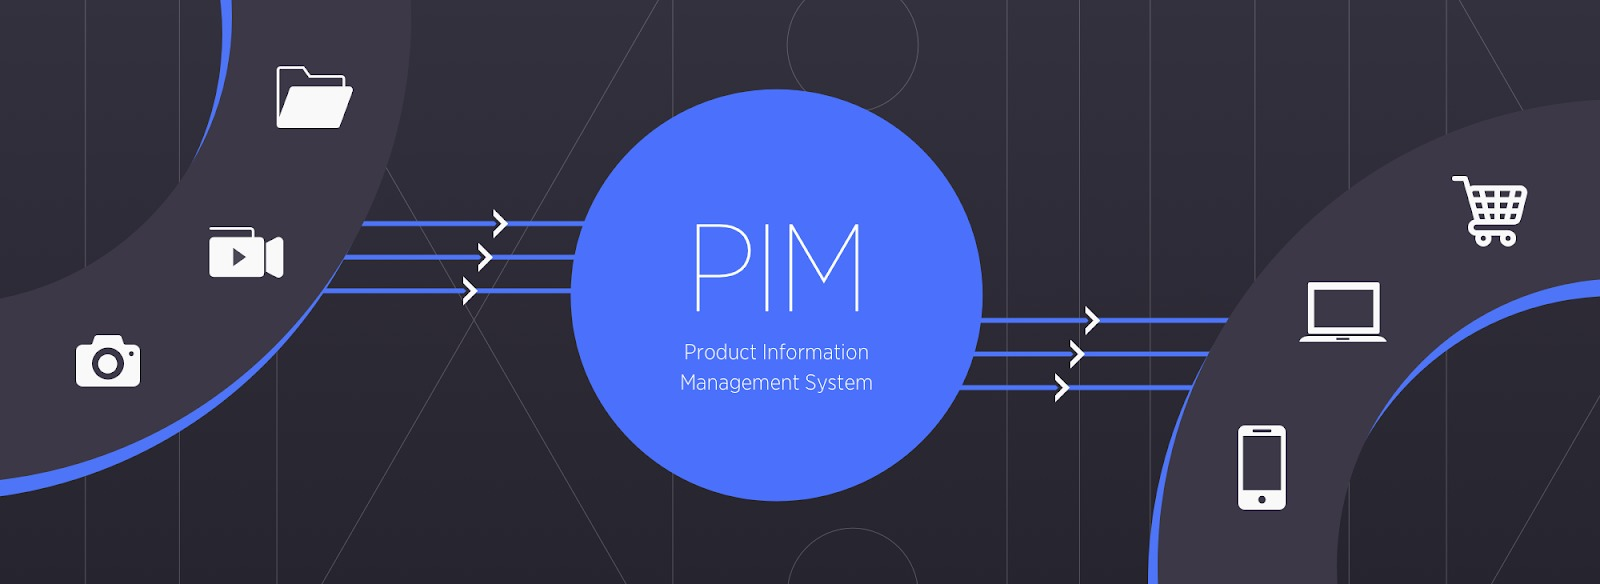 Product Infomation Management